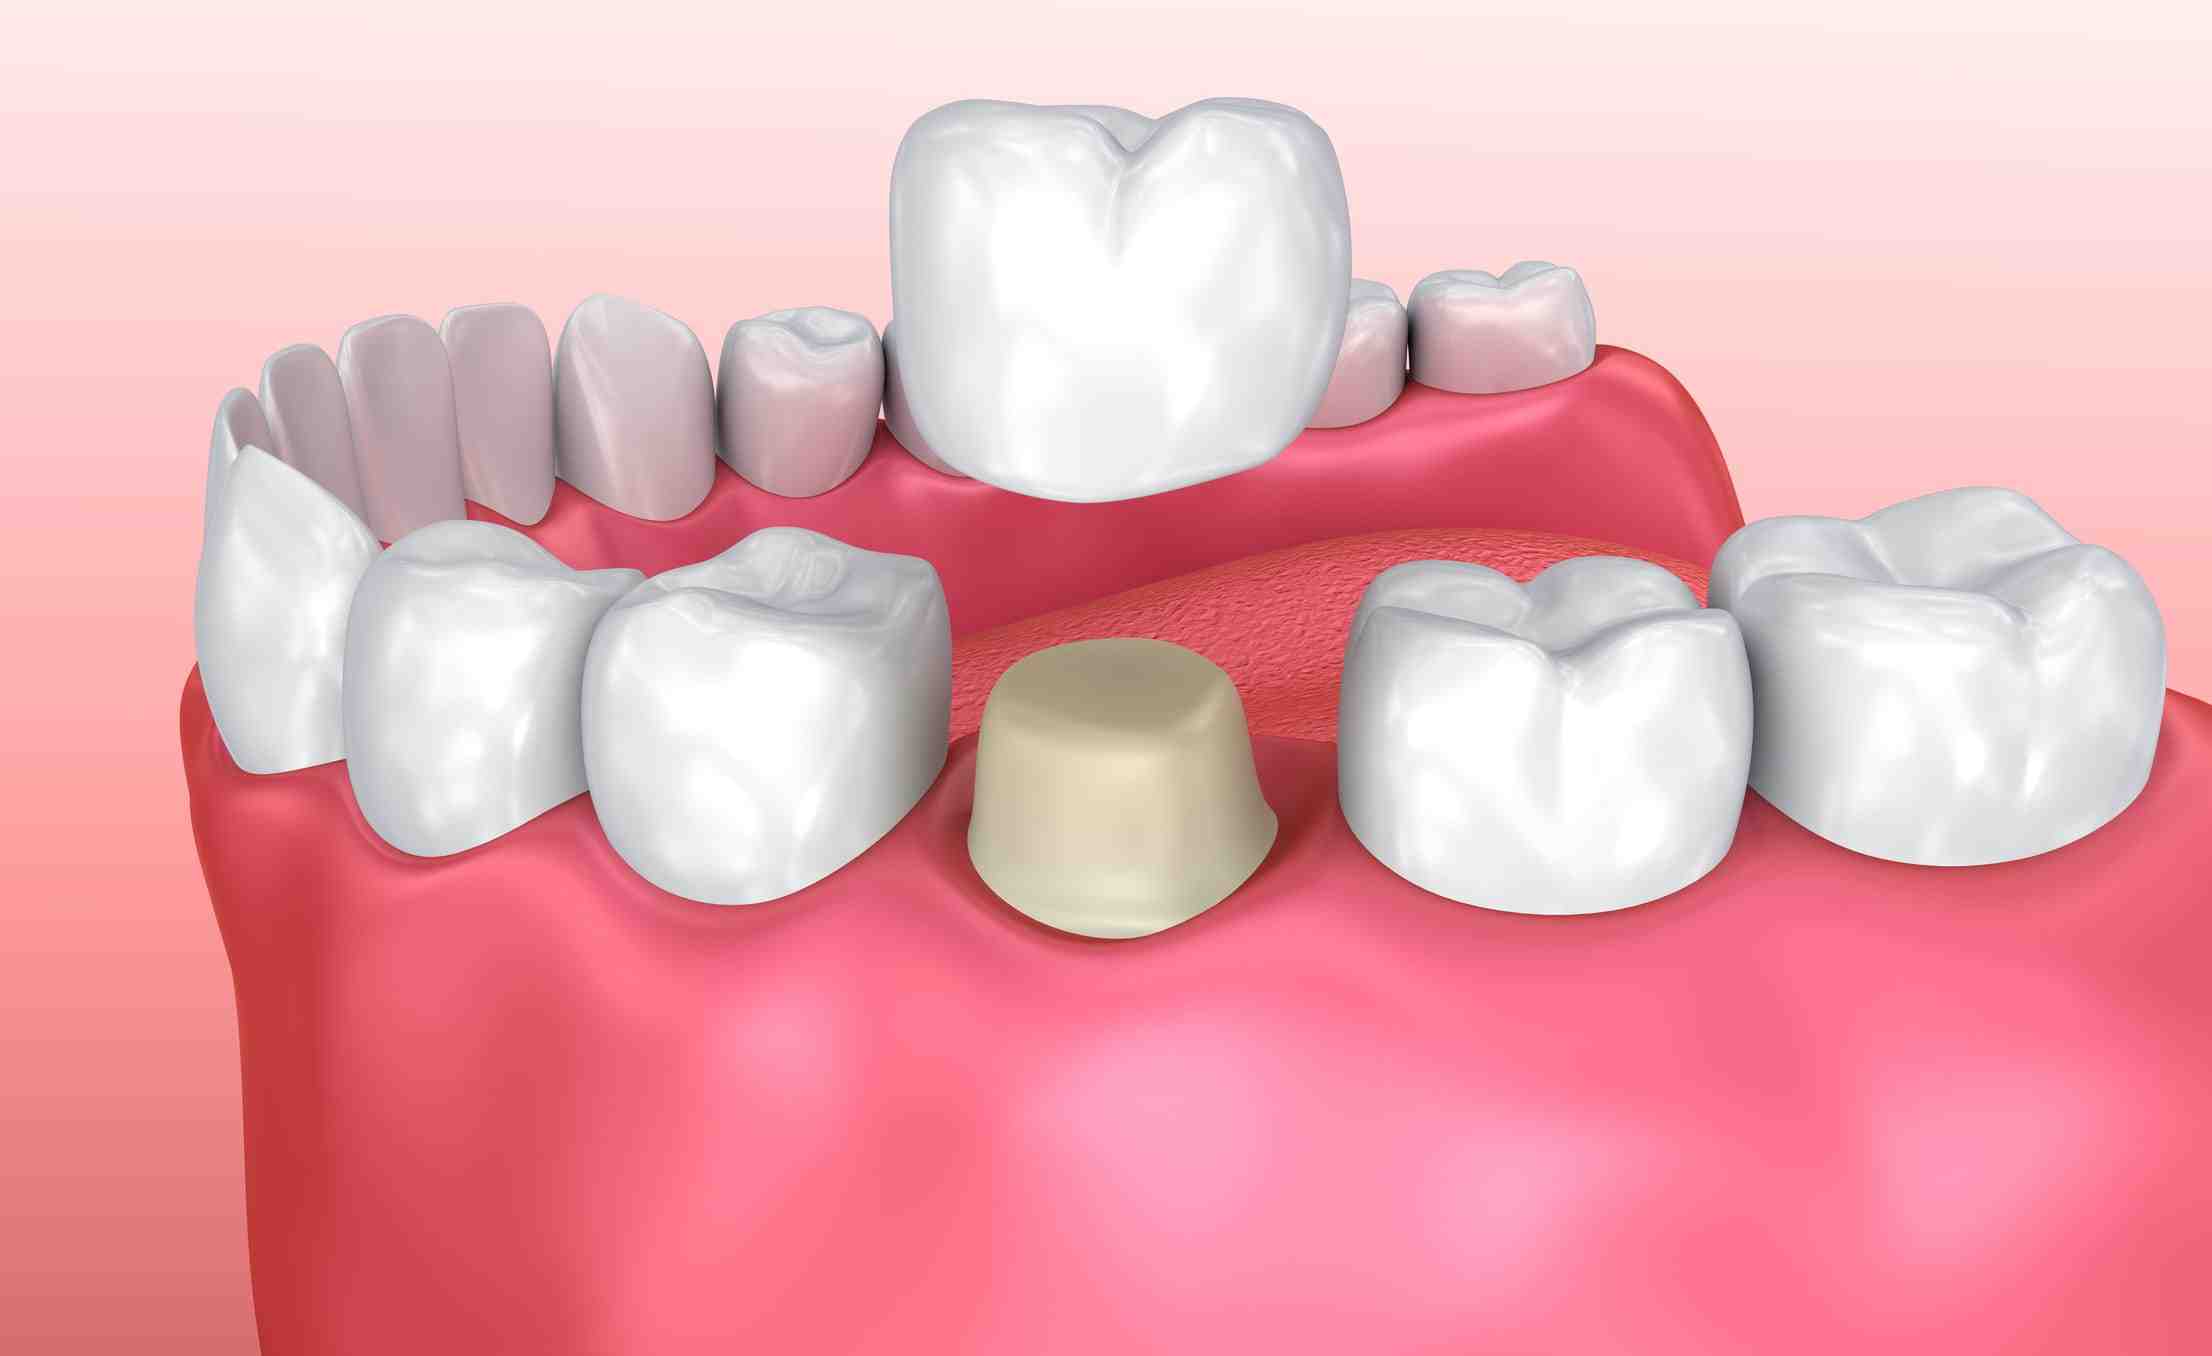 What are the most comfortable dentures?